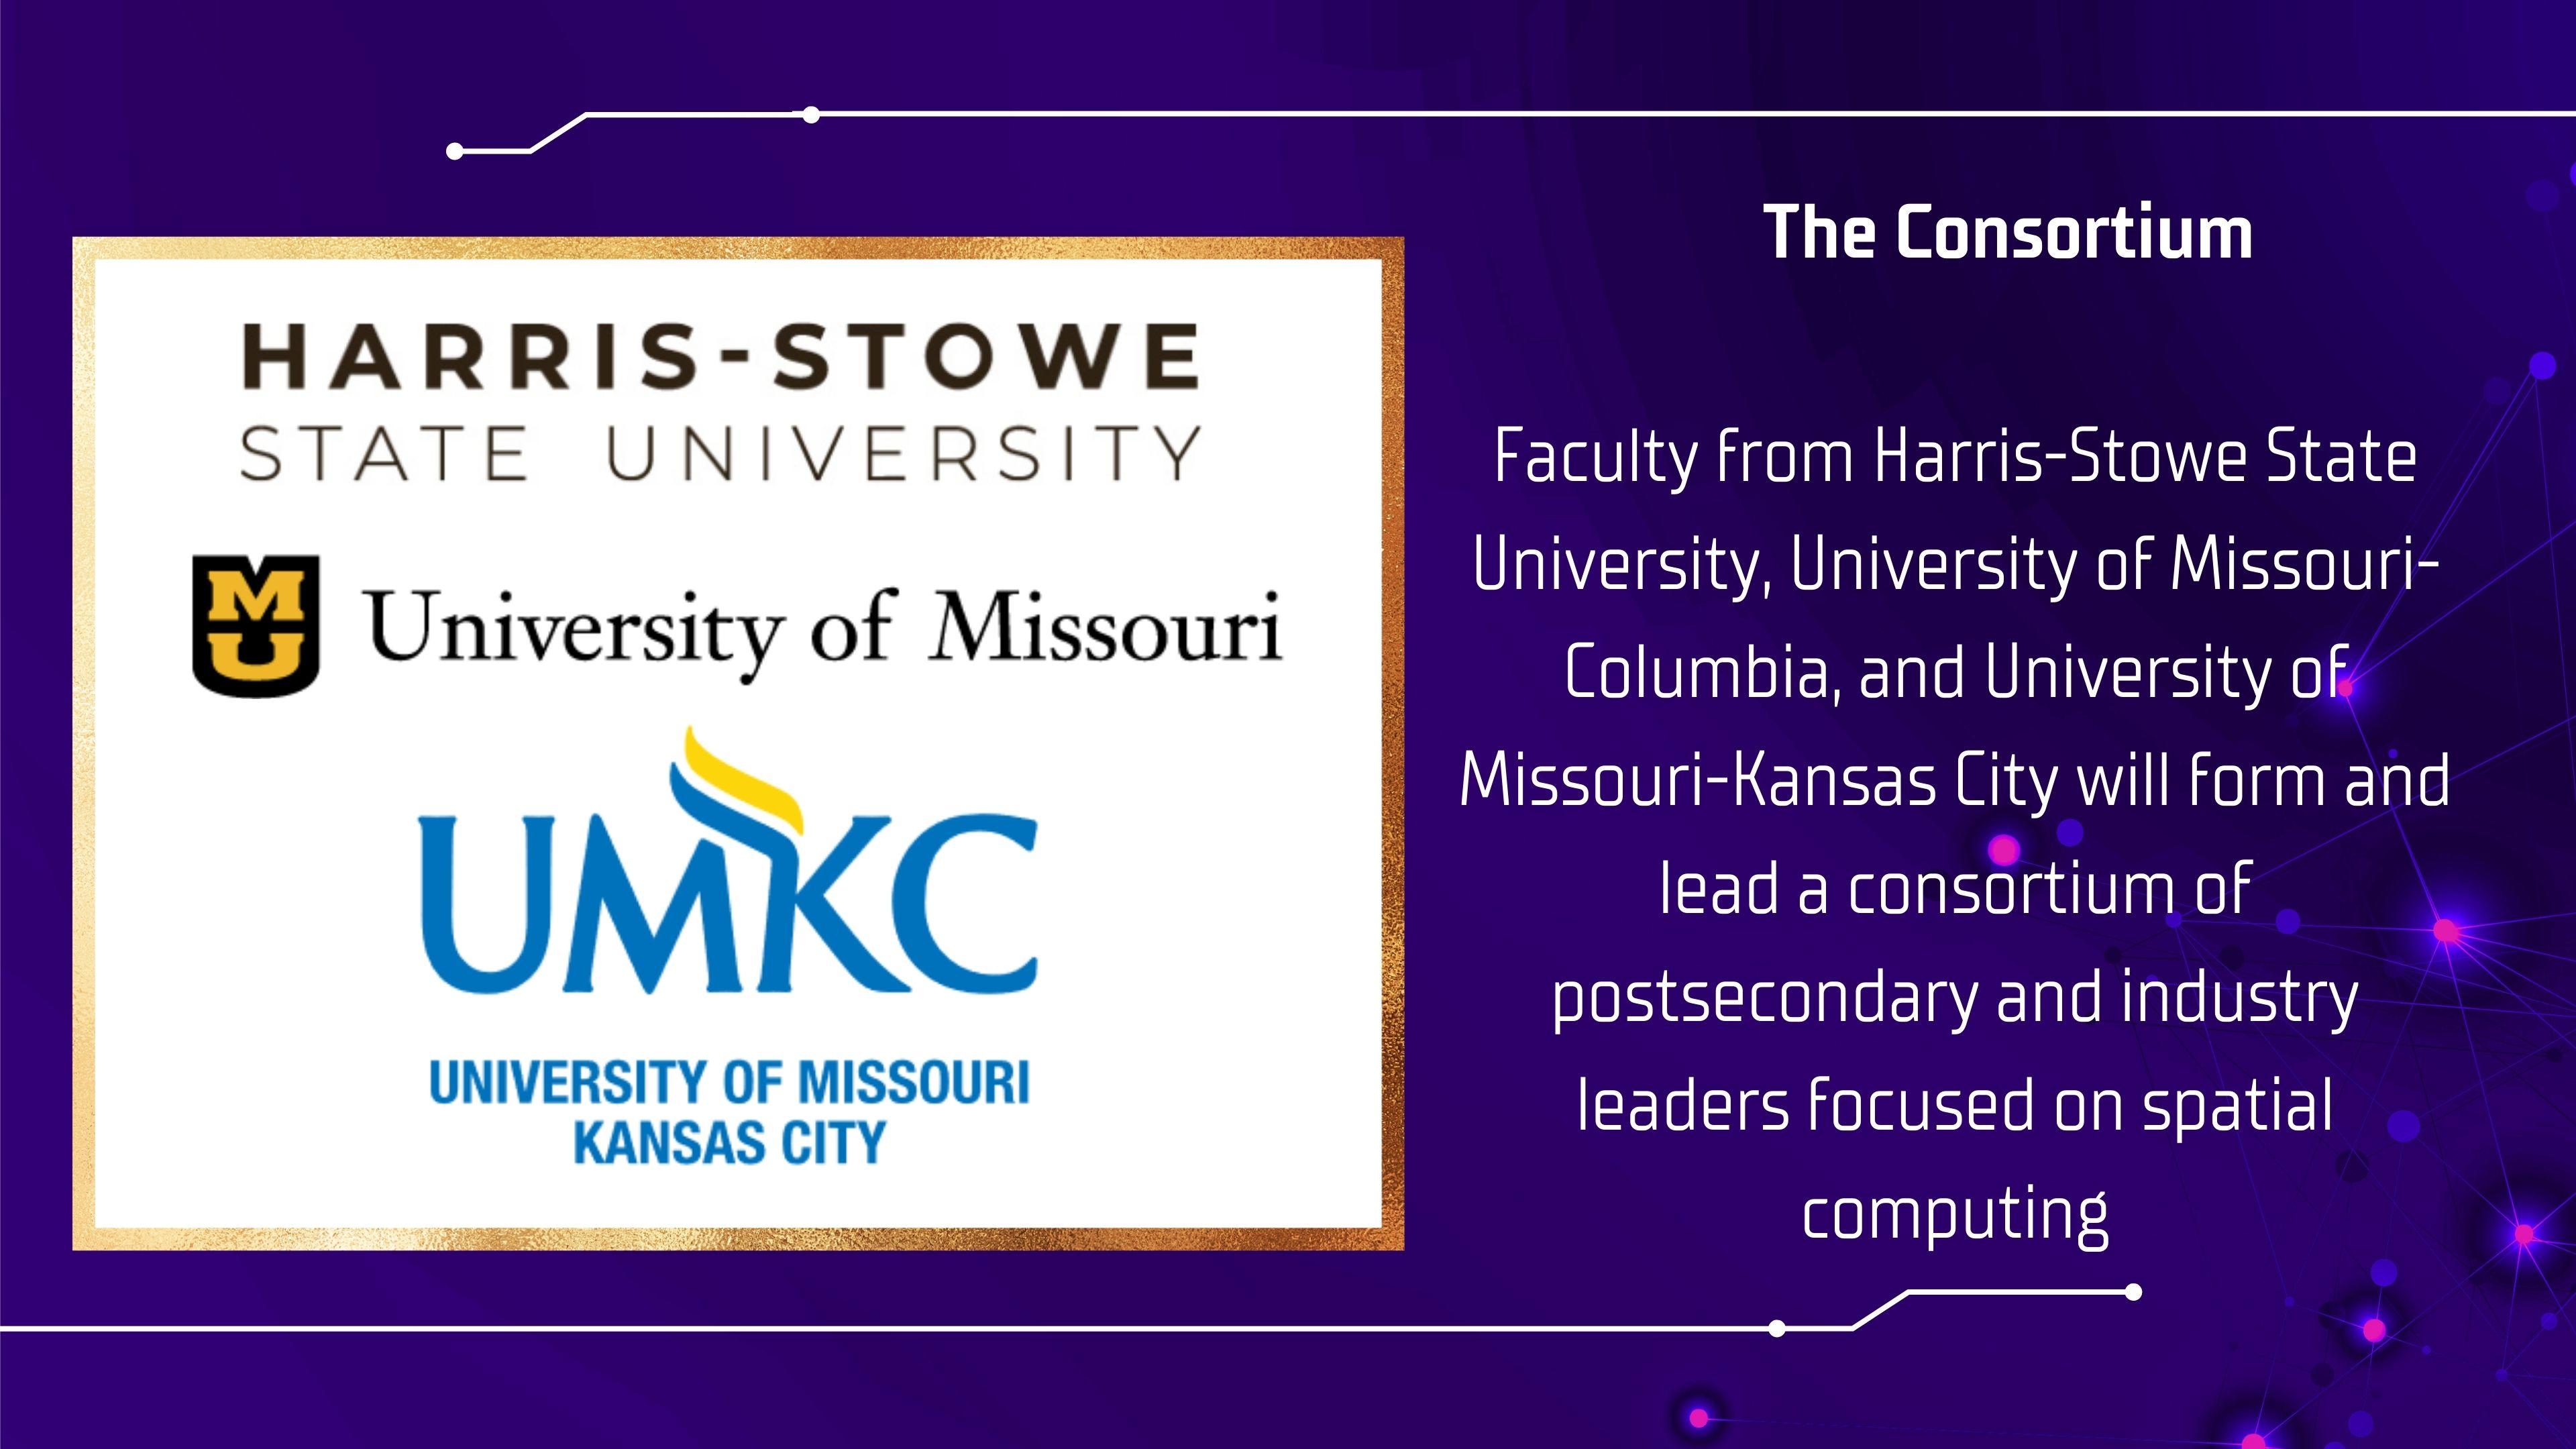 The Consortium.  Faculty from Harris-Stowe University, University of Missouri - Columbia, and University of Missouri-Kansas City will form and lead a consortium of postsecondary and industry leaders focused on spatial computing